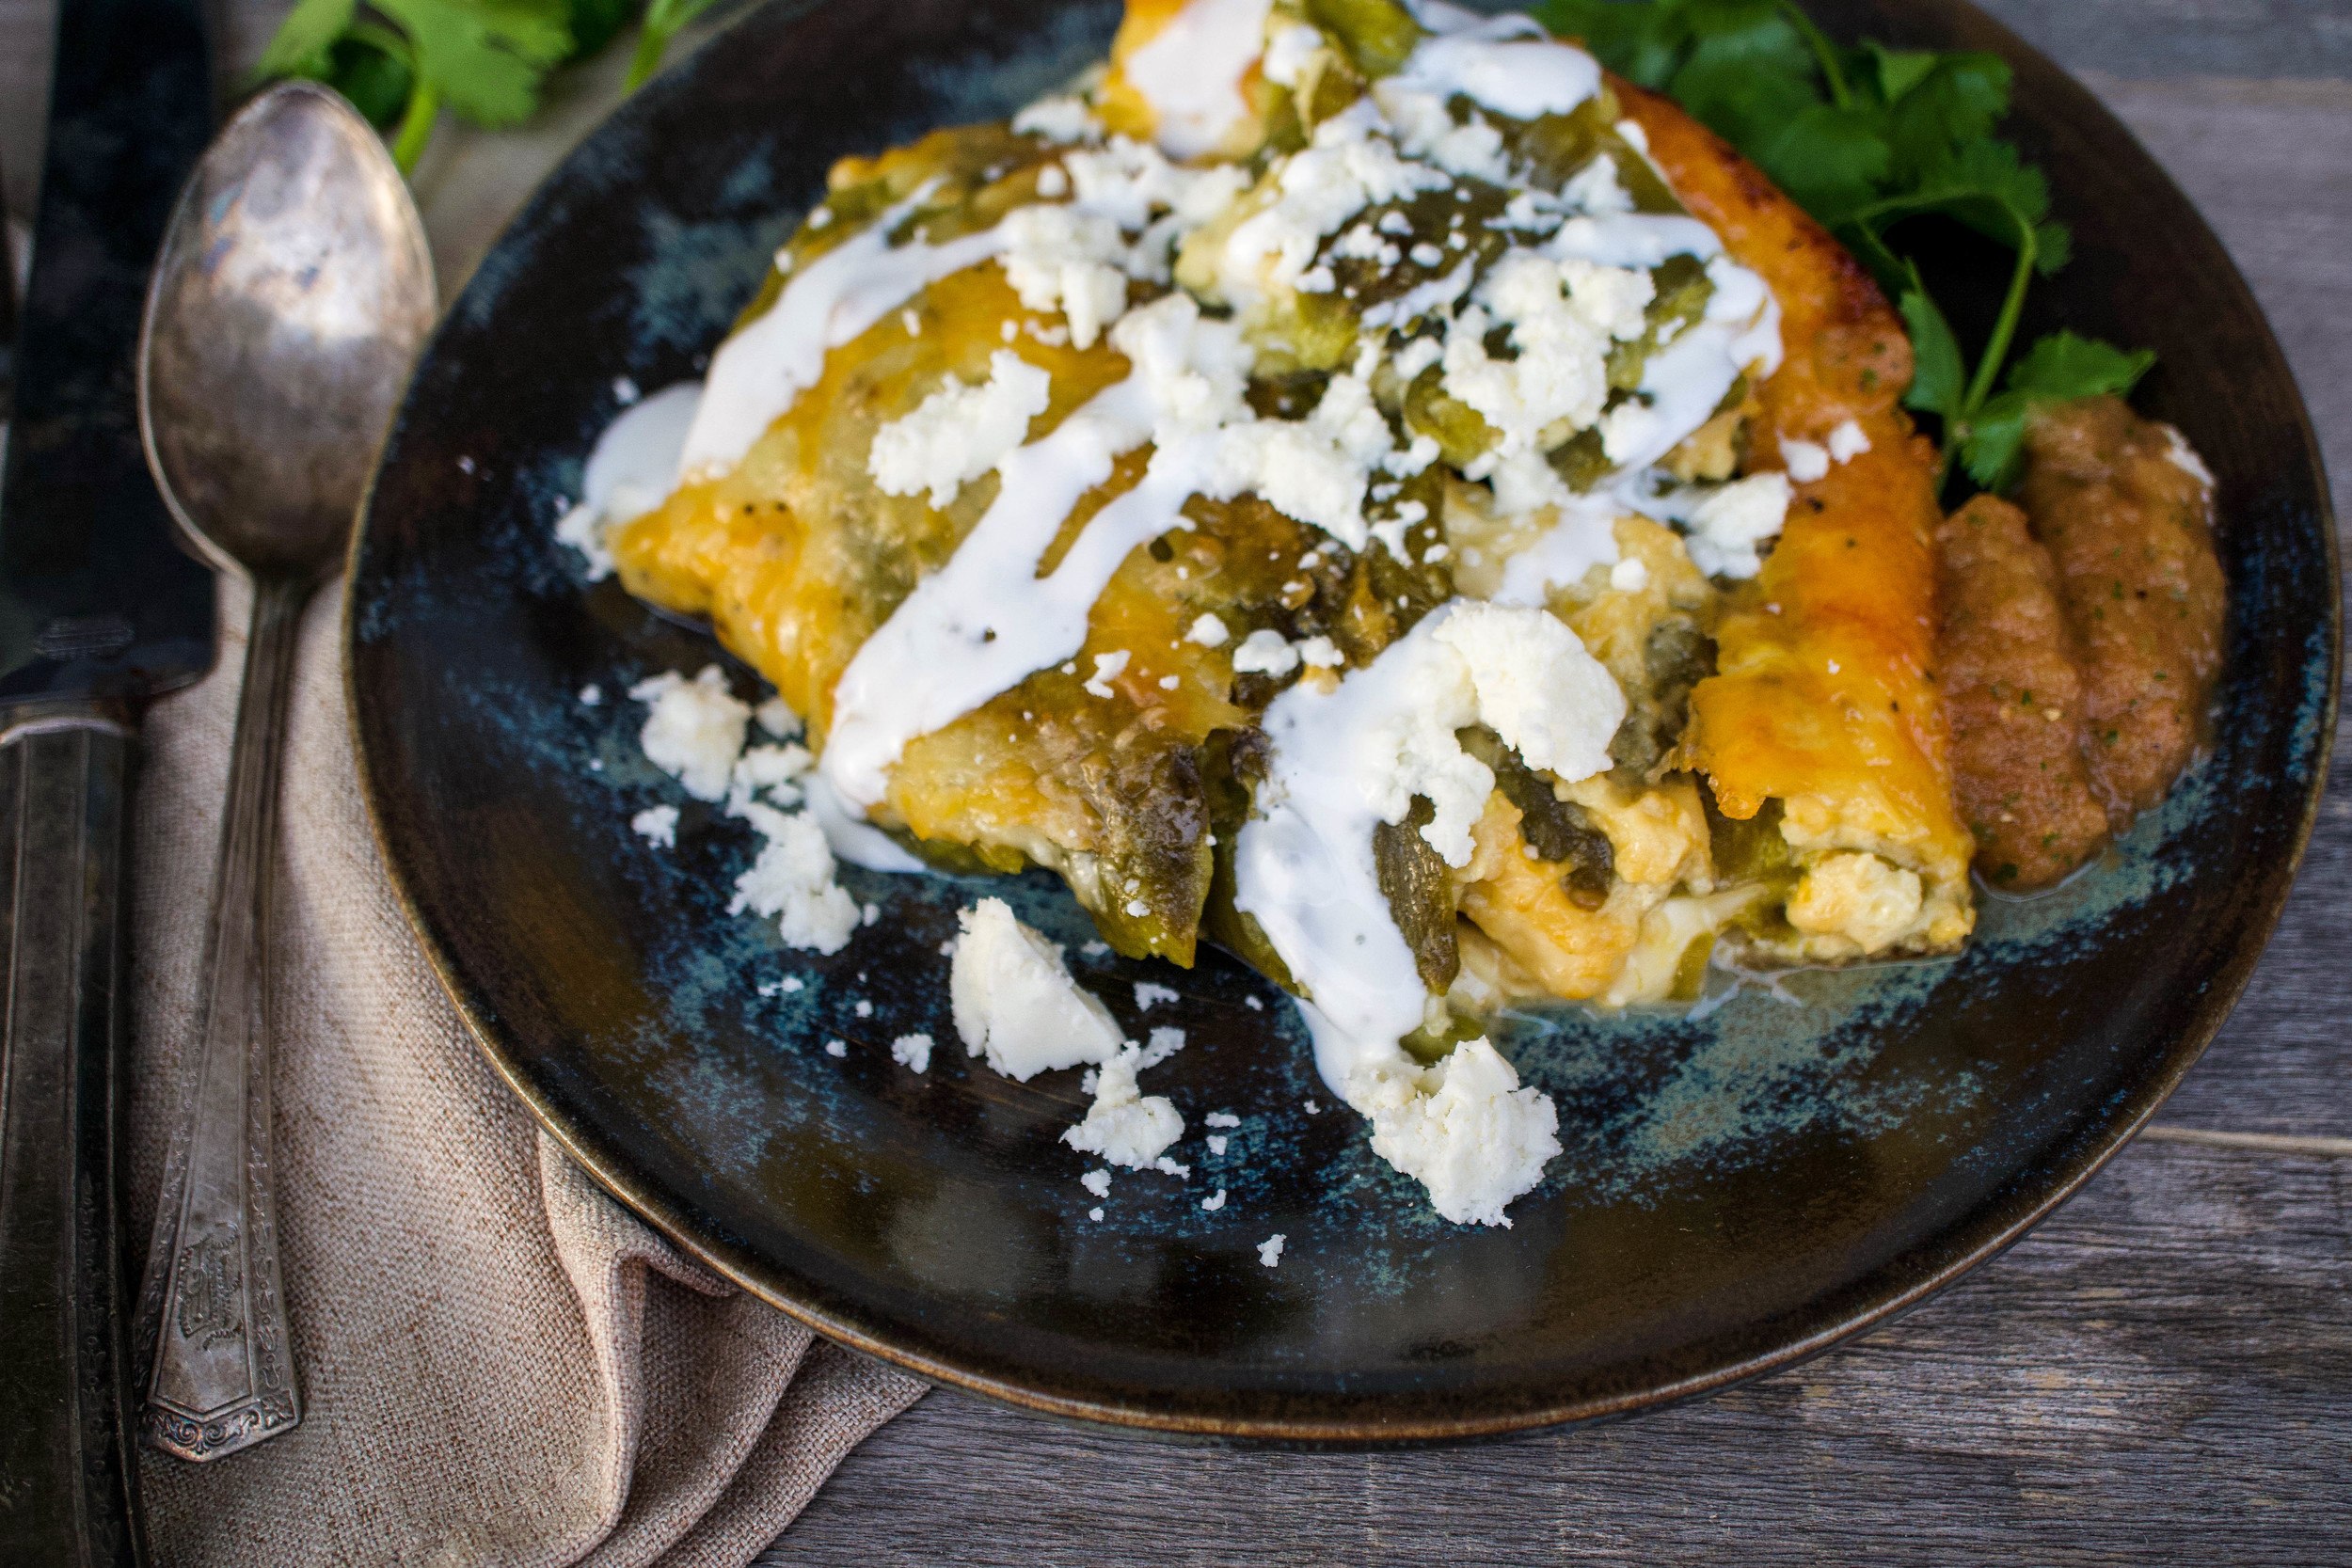 Easy Chili Relleno Casserole perfect in a Dutch Oven on coals, or indoors in the oven.